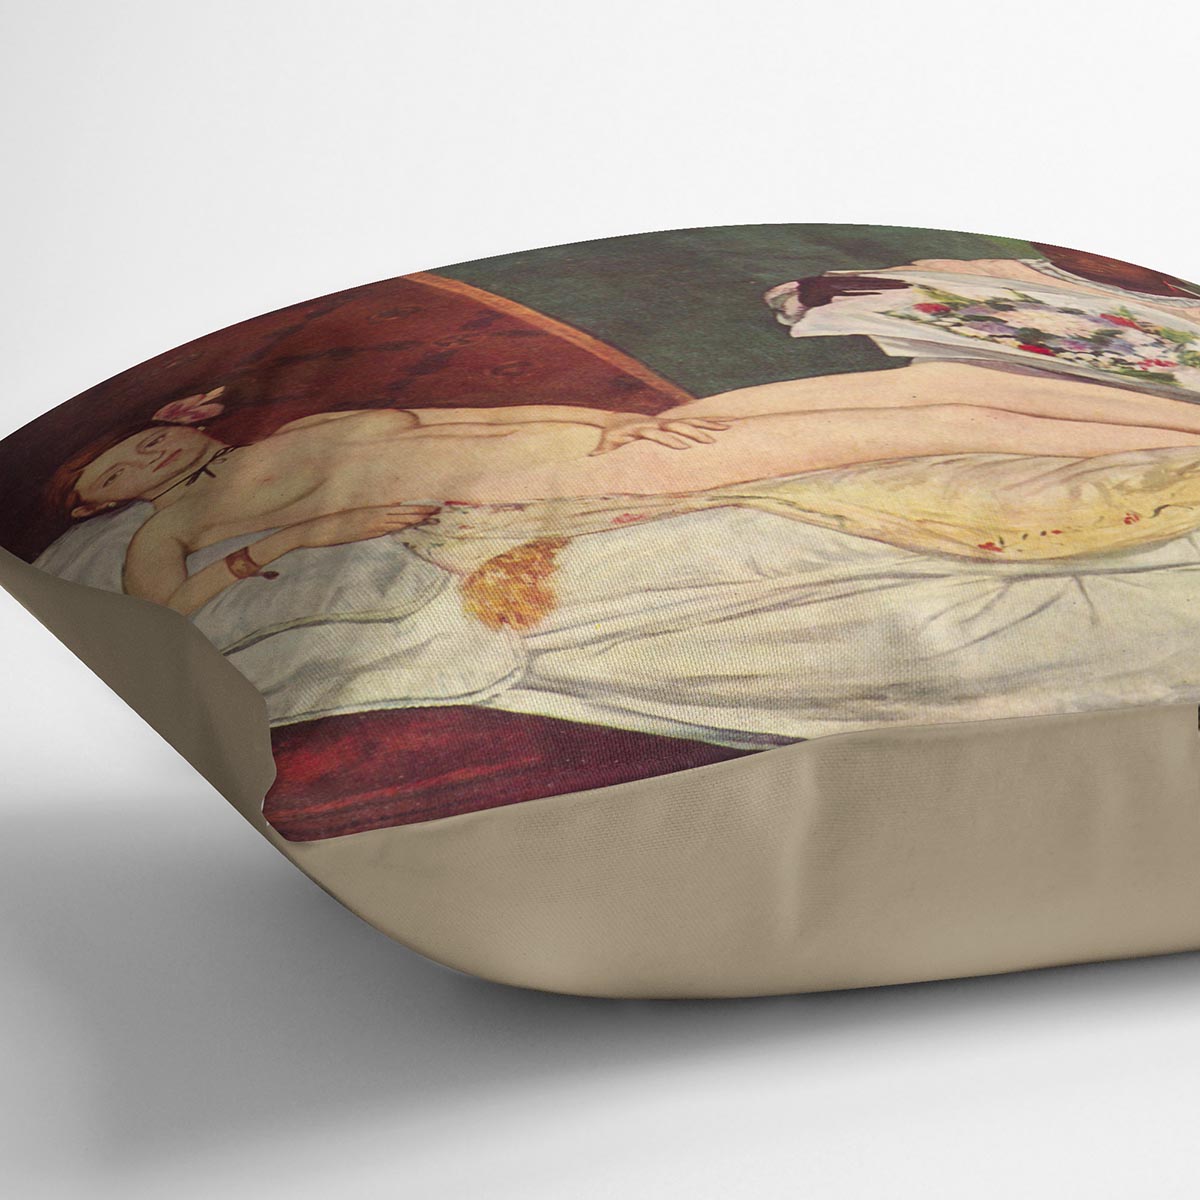 Olympia 1 by Manet Cushion